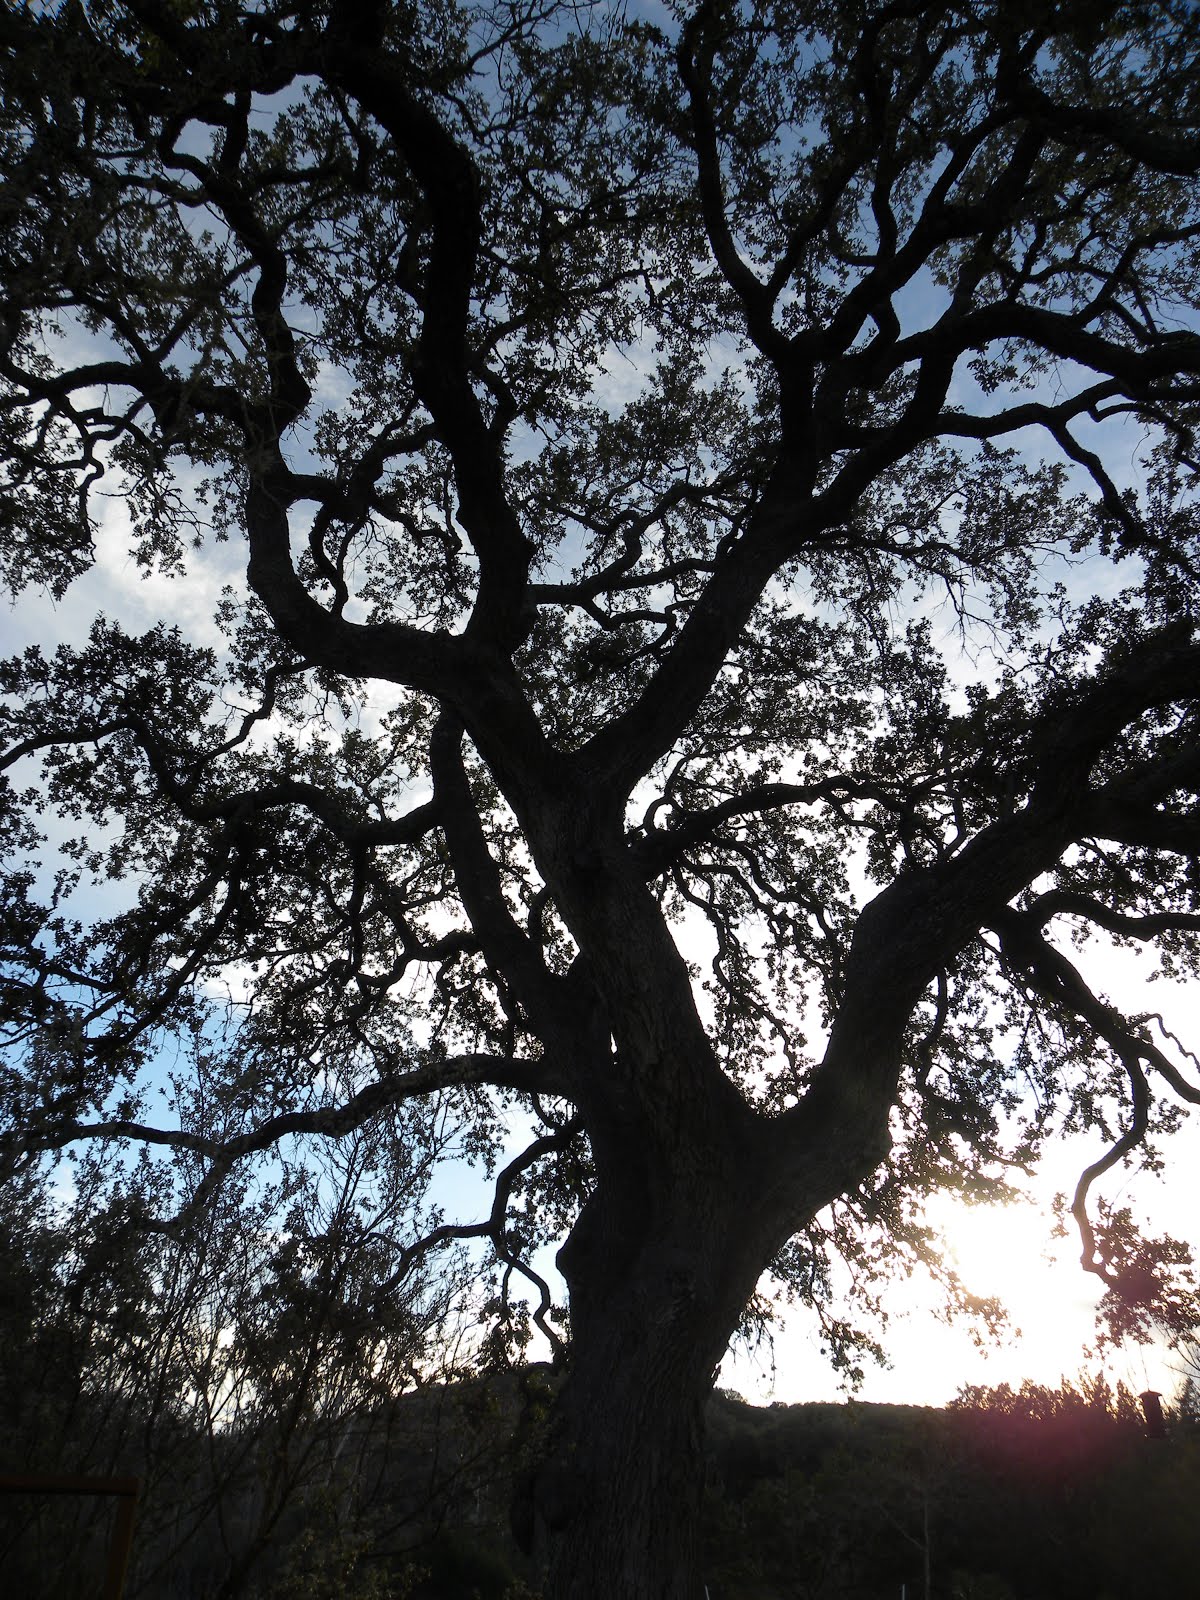 300 year-old South Texas Live Oak